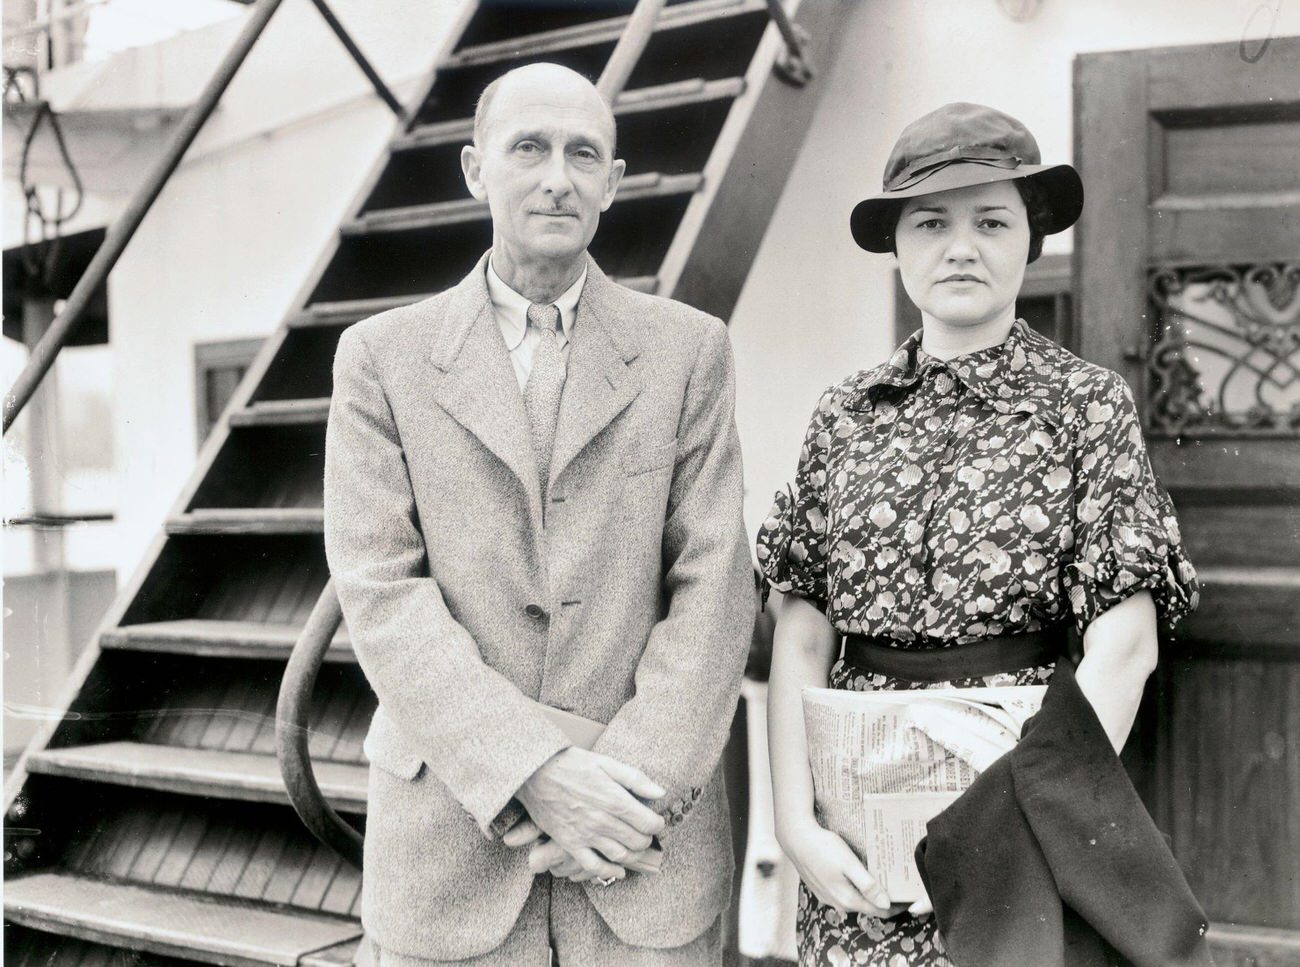 Marine explorer William Beebe with his wife, returning from European vacation.